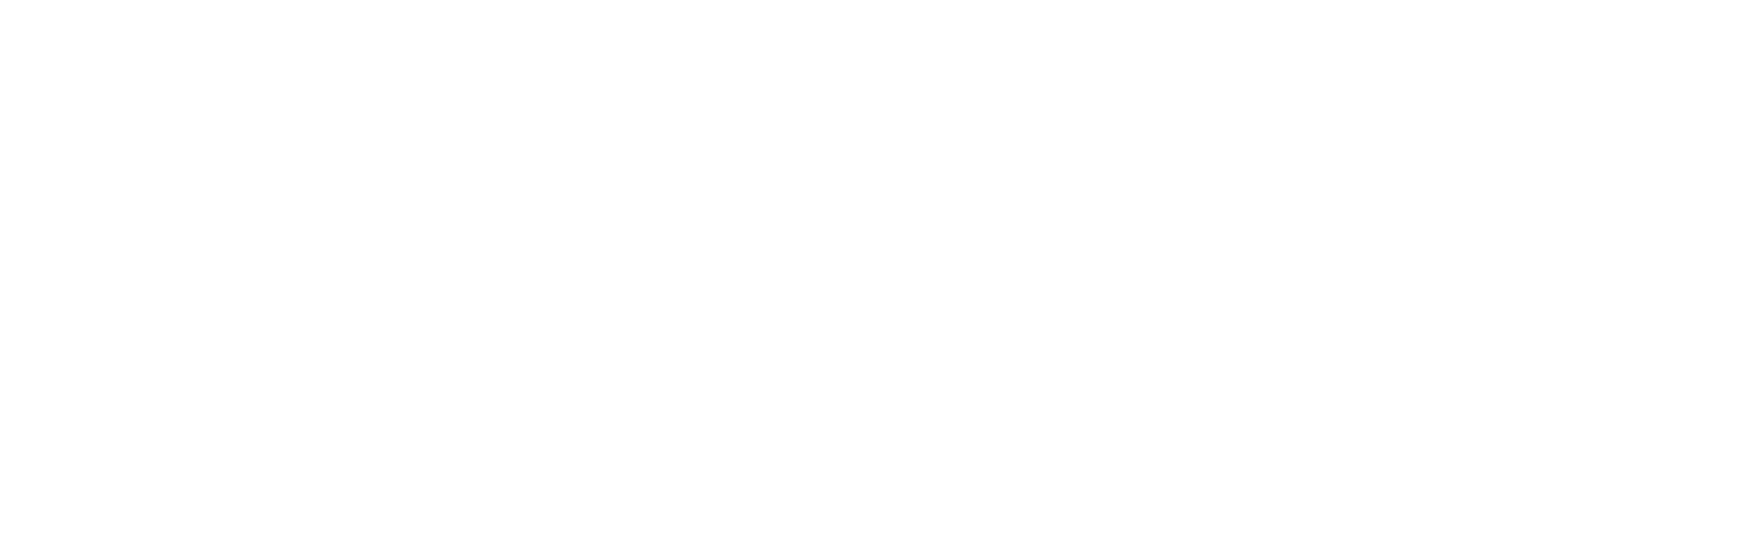 CoInnovate Consulting